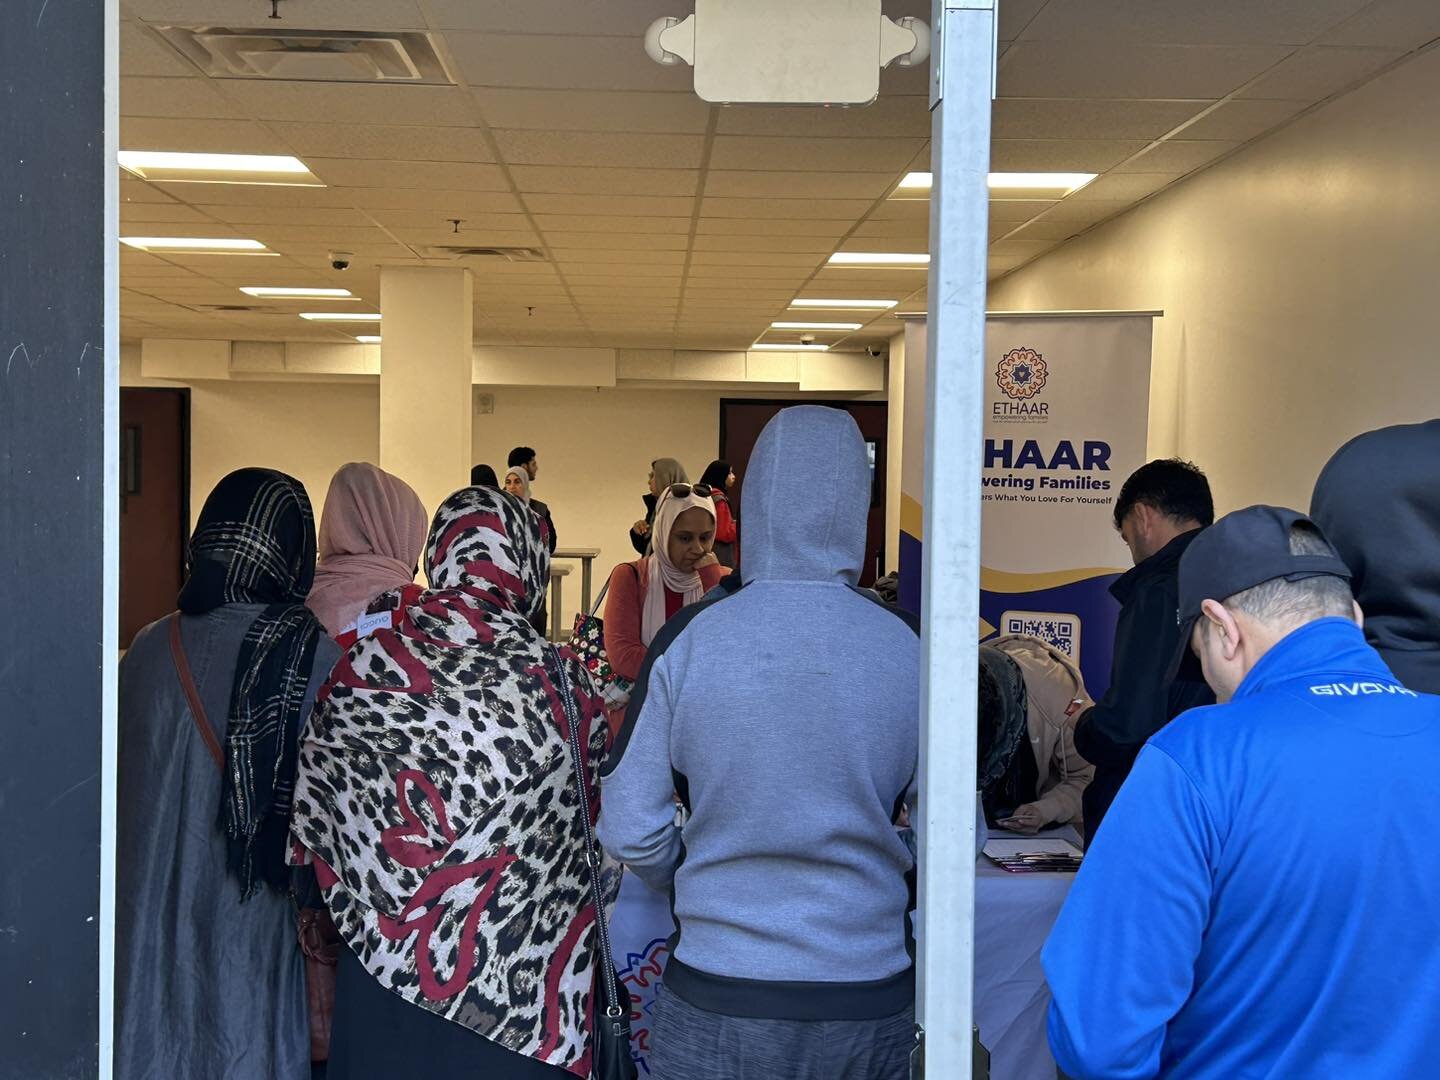 We recently applied for an Islamic Relief USA grant to provide us with food boxes for the underserved in Clarkston. Yesterday Ethaar, in conjunction with Masjid Al-Momineen, distributed 250 boxes of nonperishable food items. 

We are very proud of Al